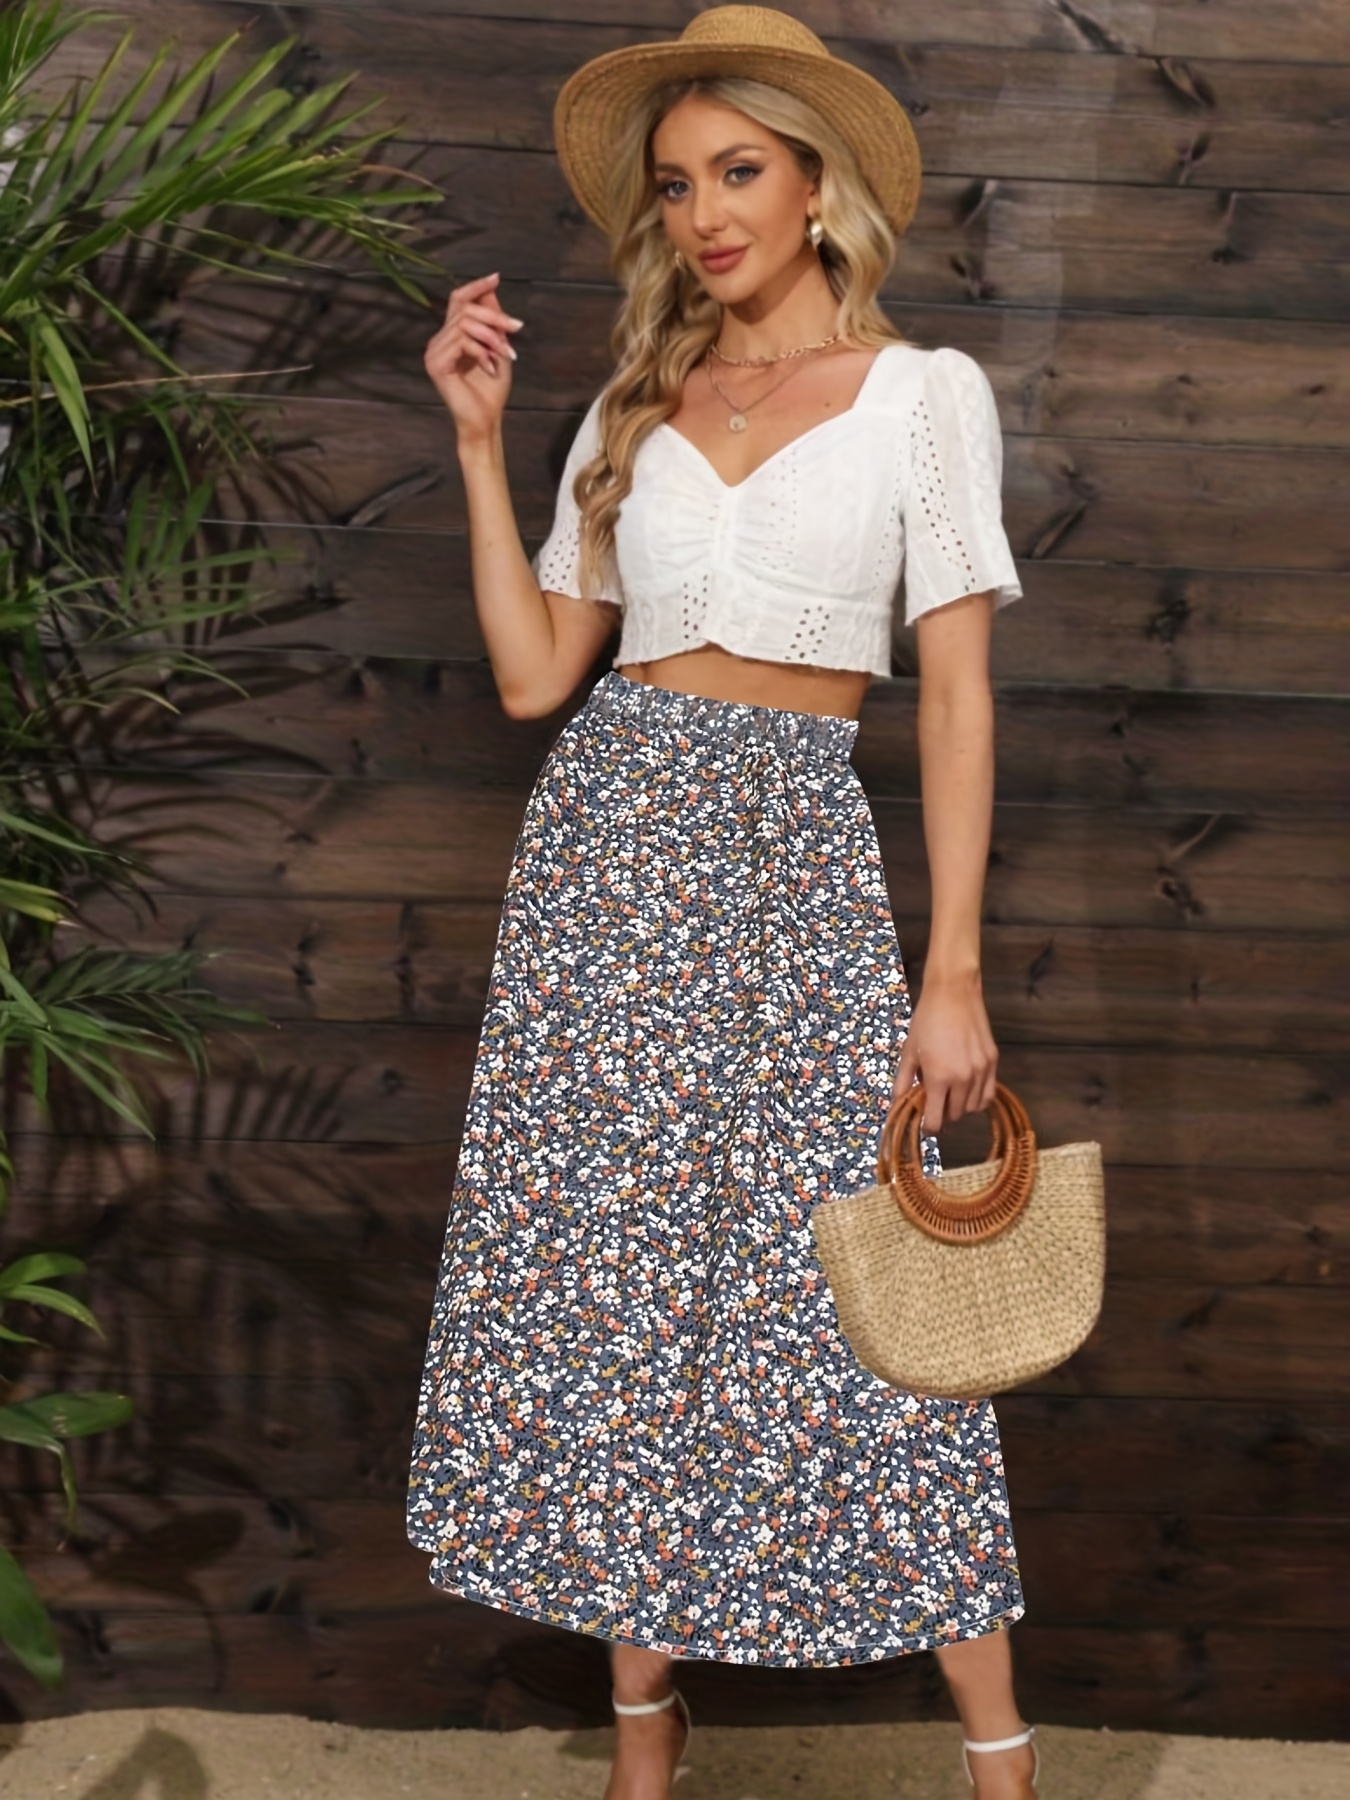 Floral Midi Skirts For Spring + Summer - an indigo day